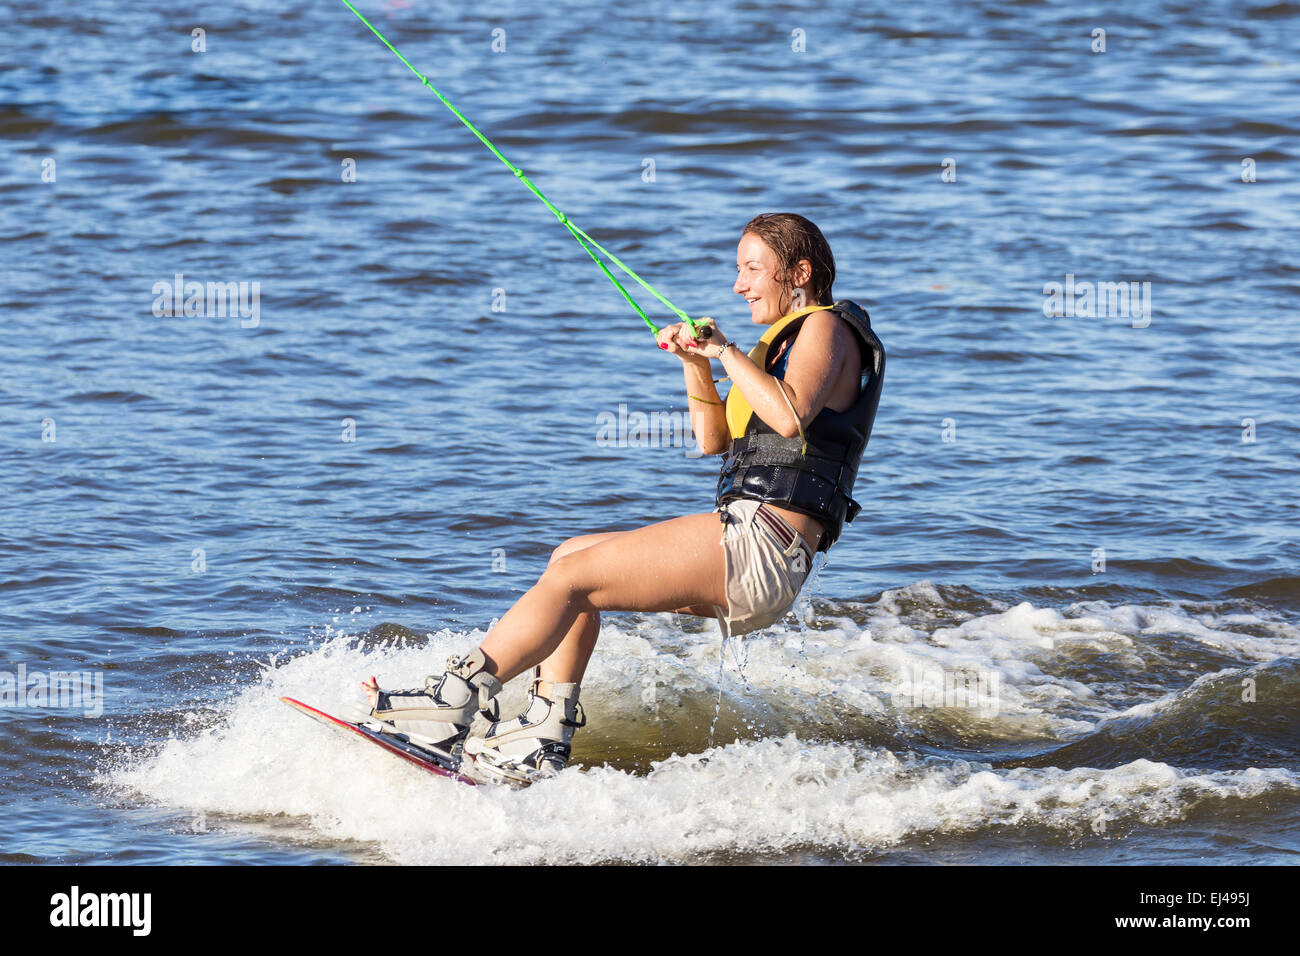 Woman study riding on a wakeboard outdoors Stock Photo